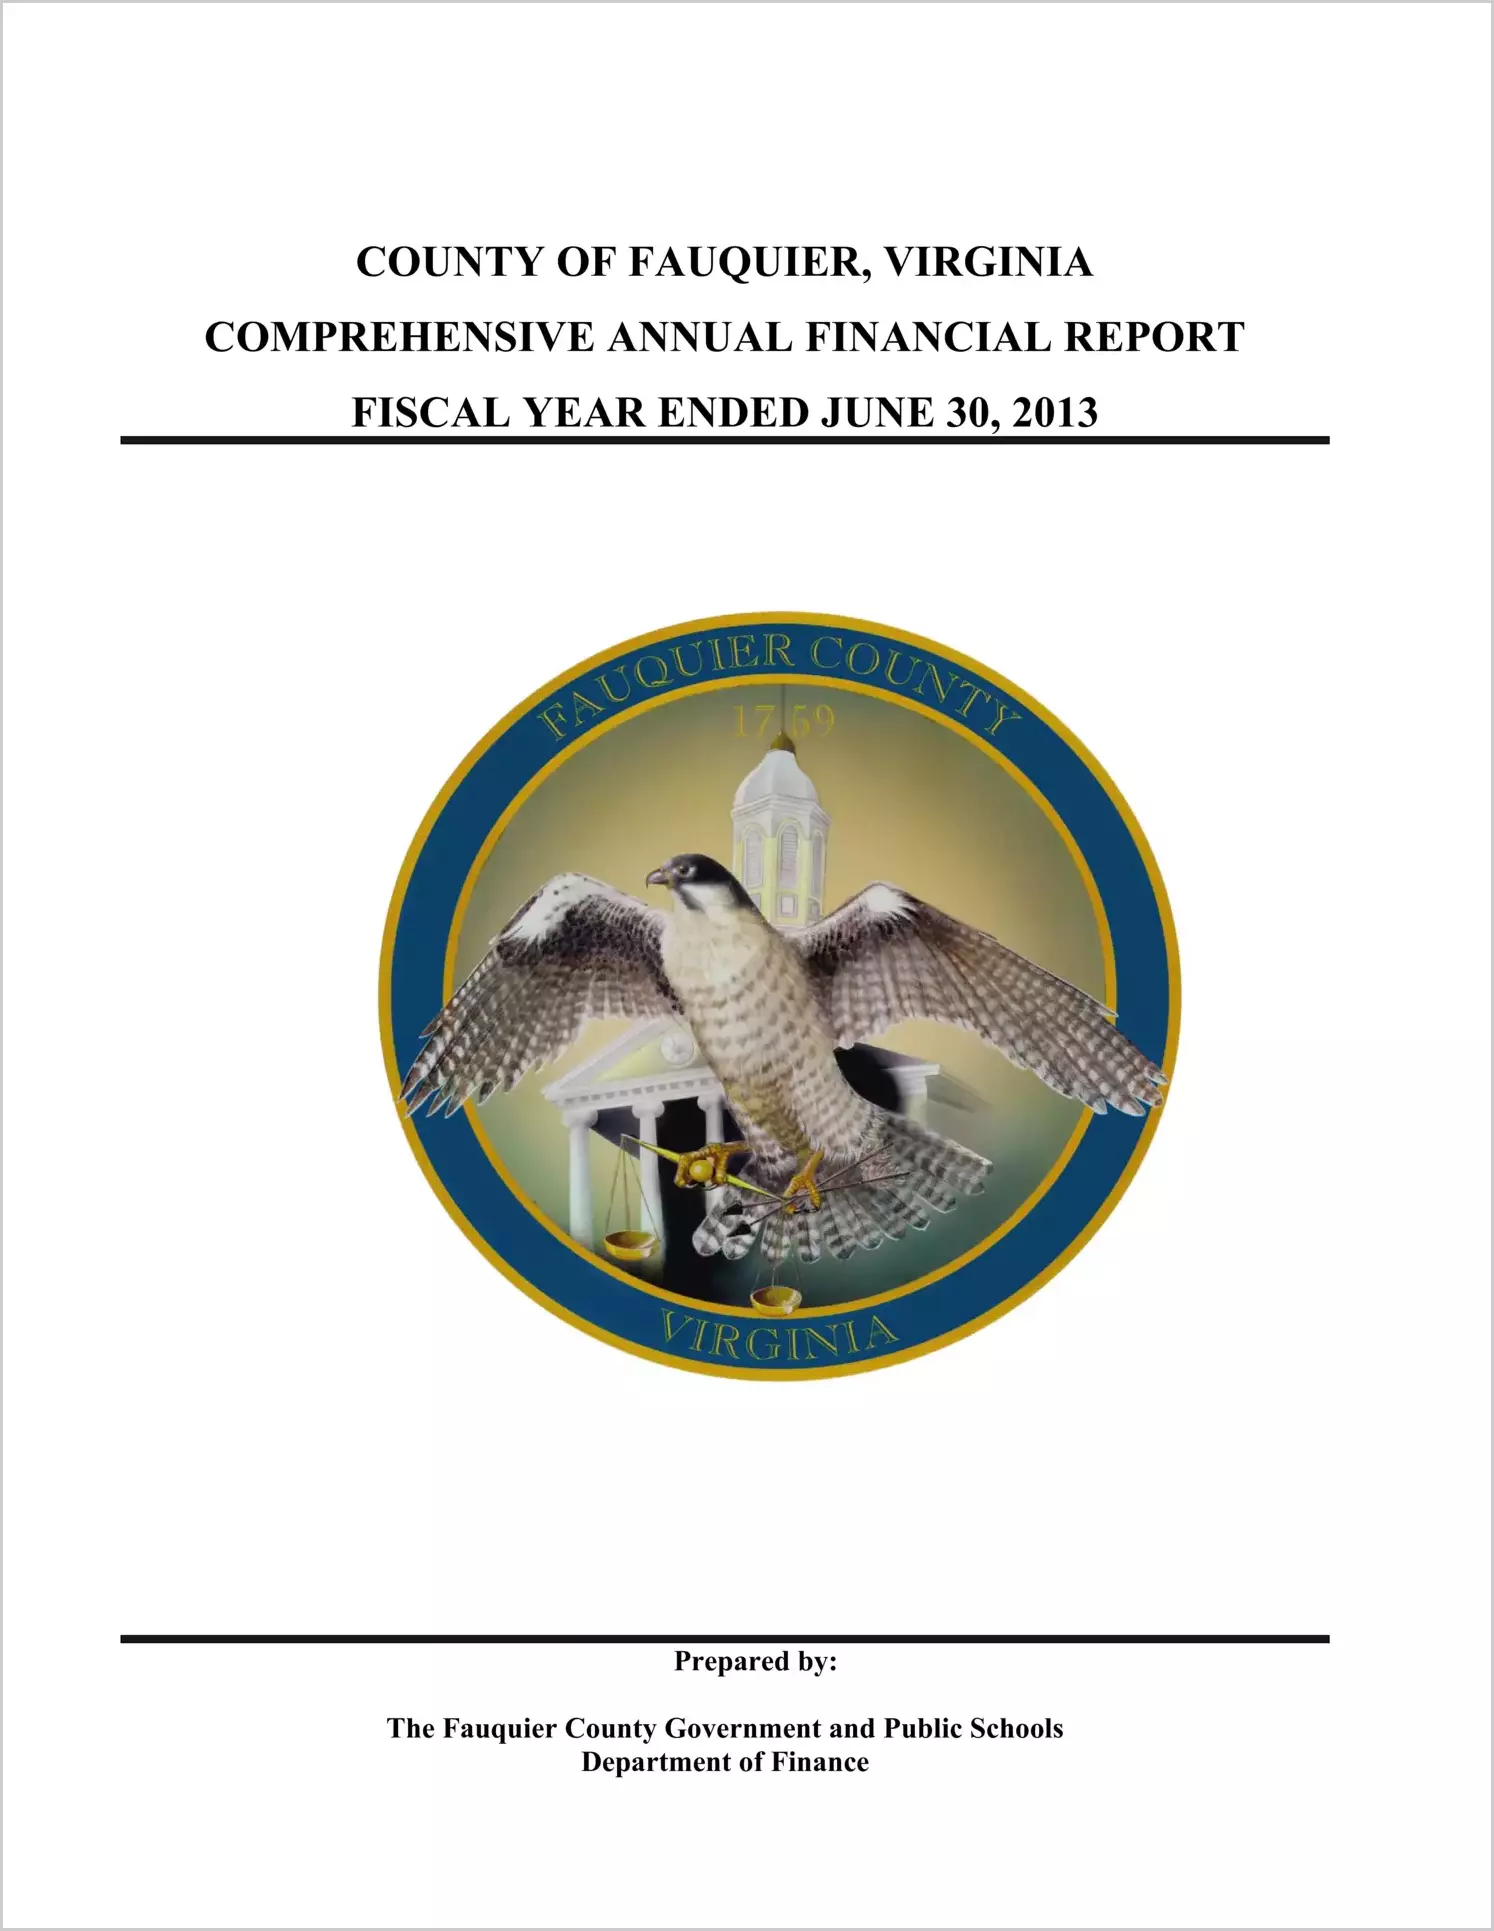 2013 Annual Financial Report for County of Fauquier